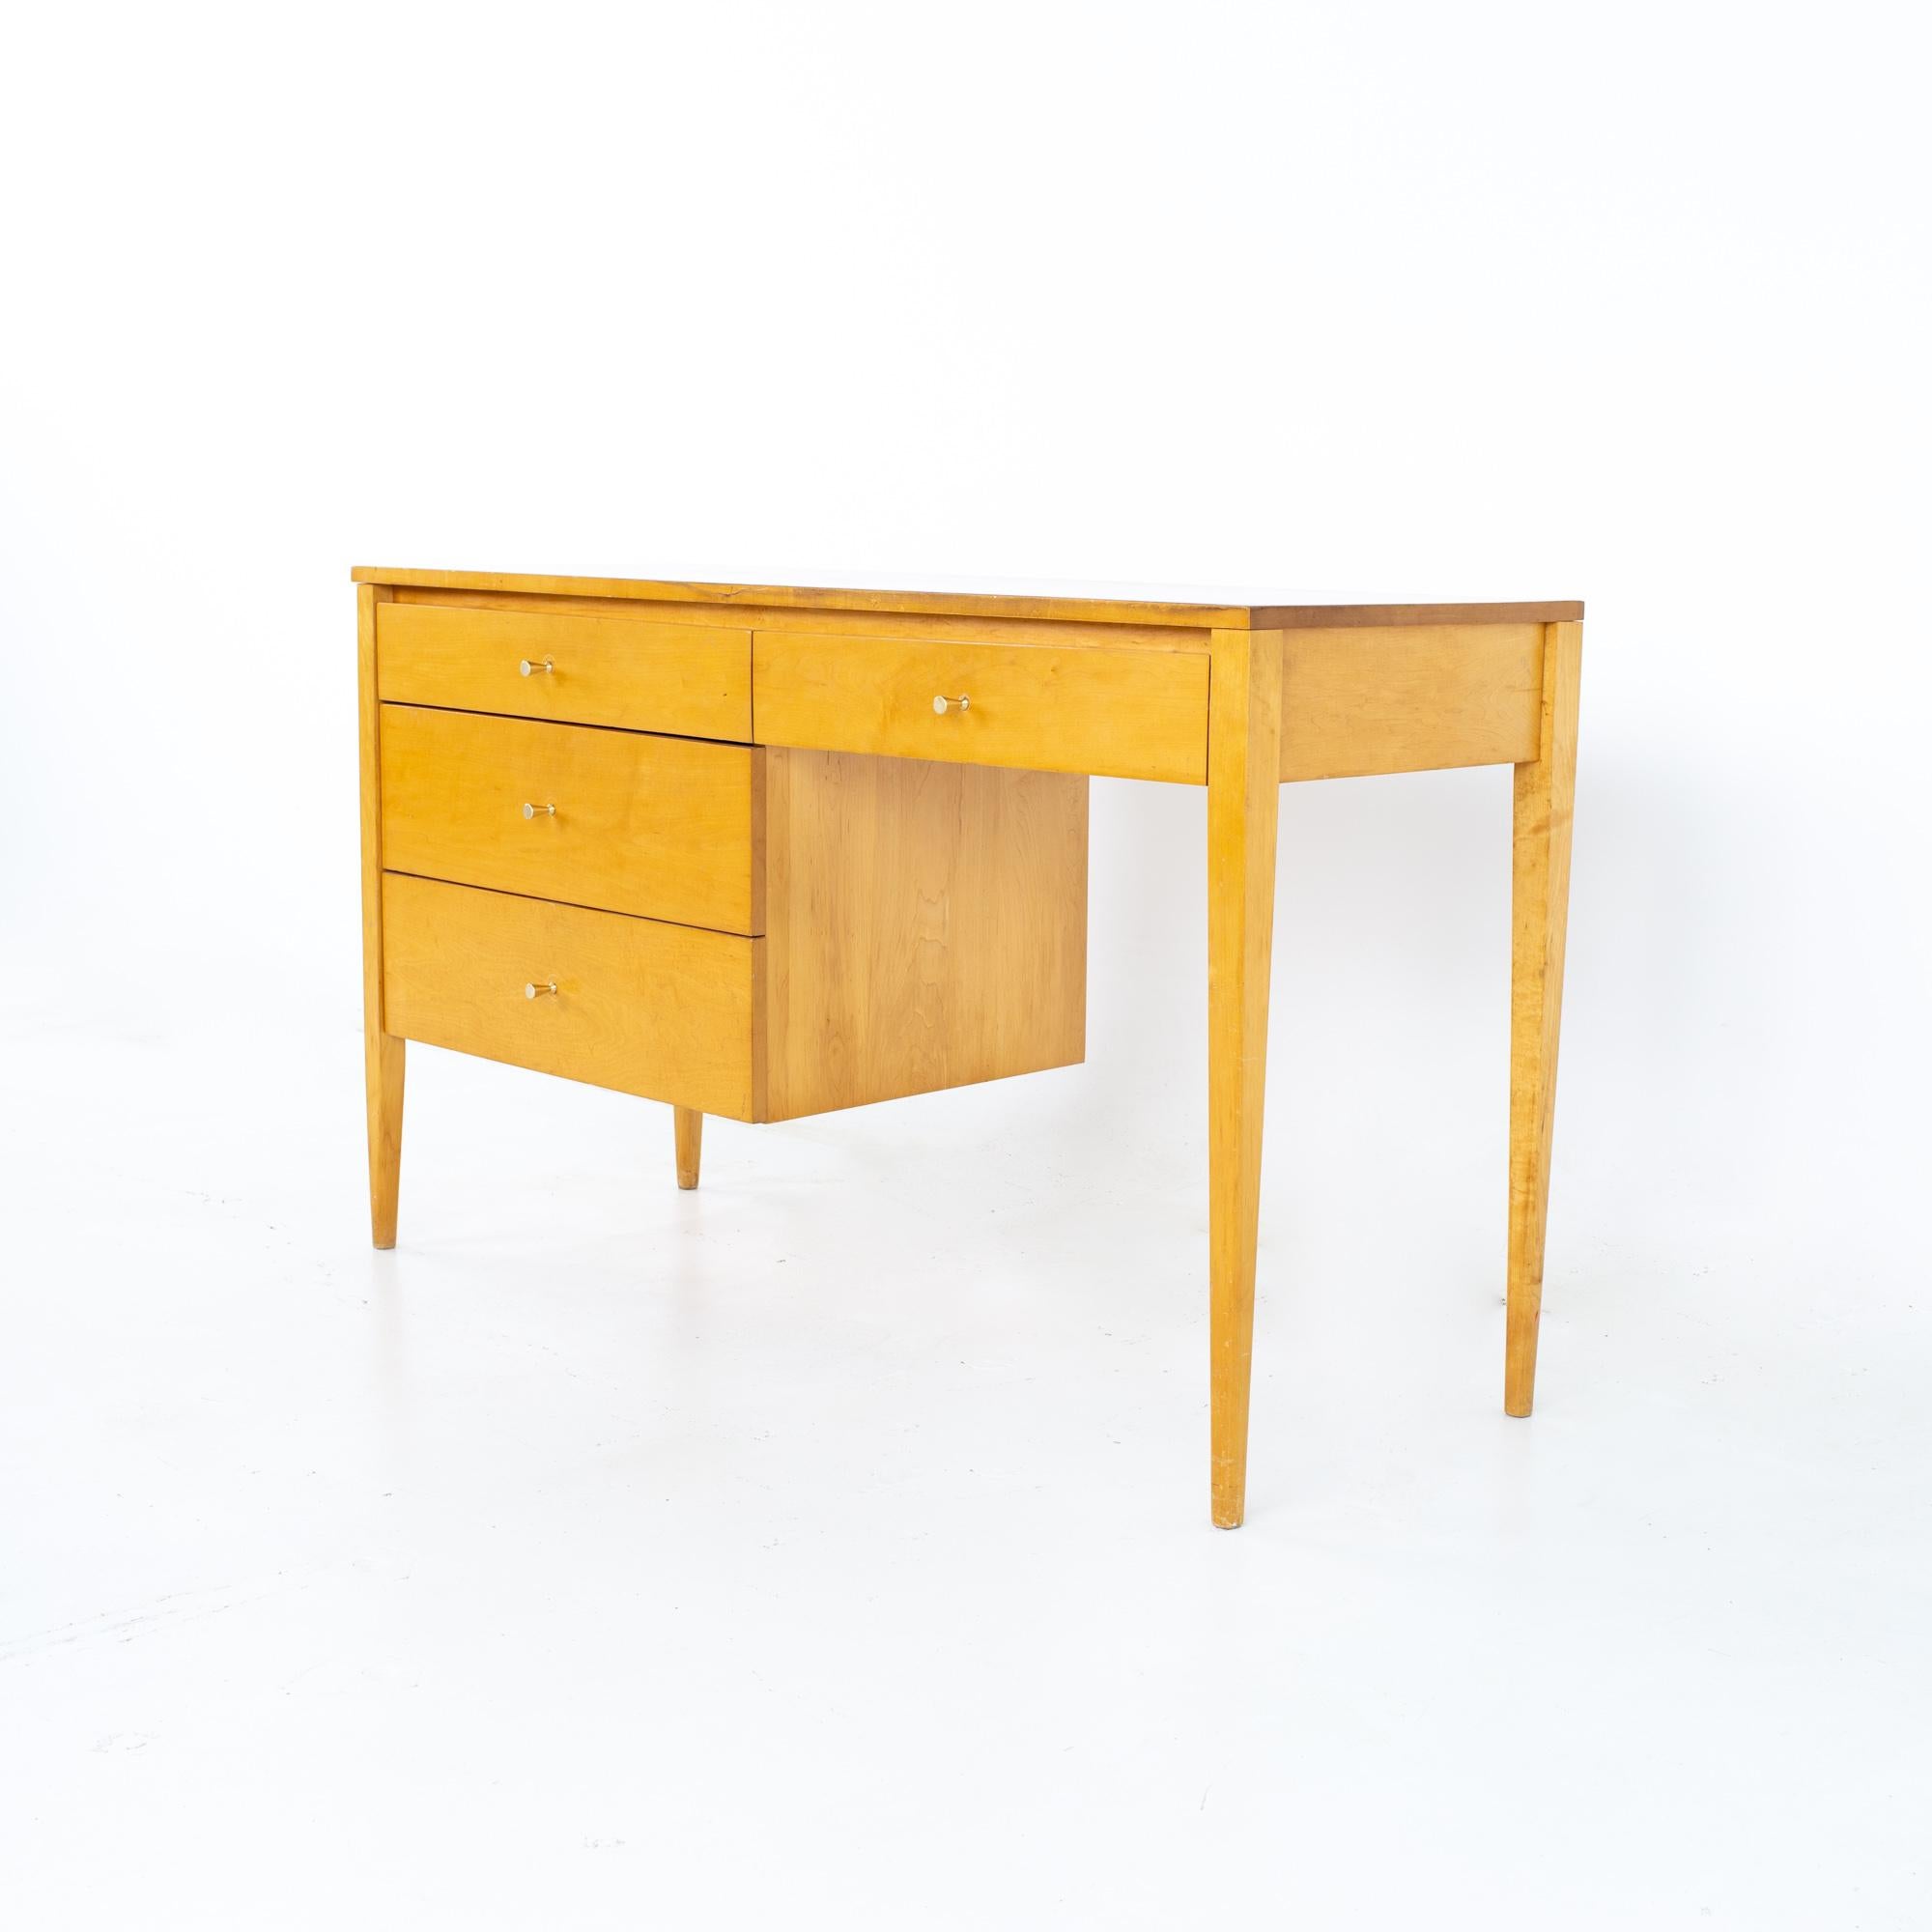 Paul McCobb for Planner Group mid century blonde 4 drawer desk.
Desk measures: 48 wide x 18.25 deep x 29 inches high

All pieces of furniture can be had in what we call restored vintage condition. That means the piece is restored upon purchase so